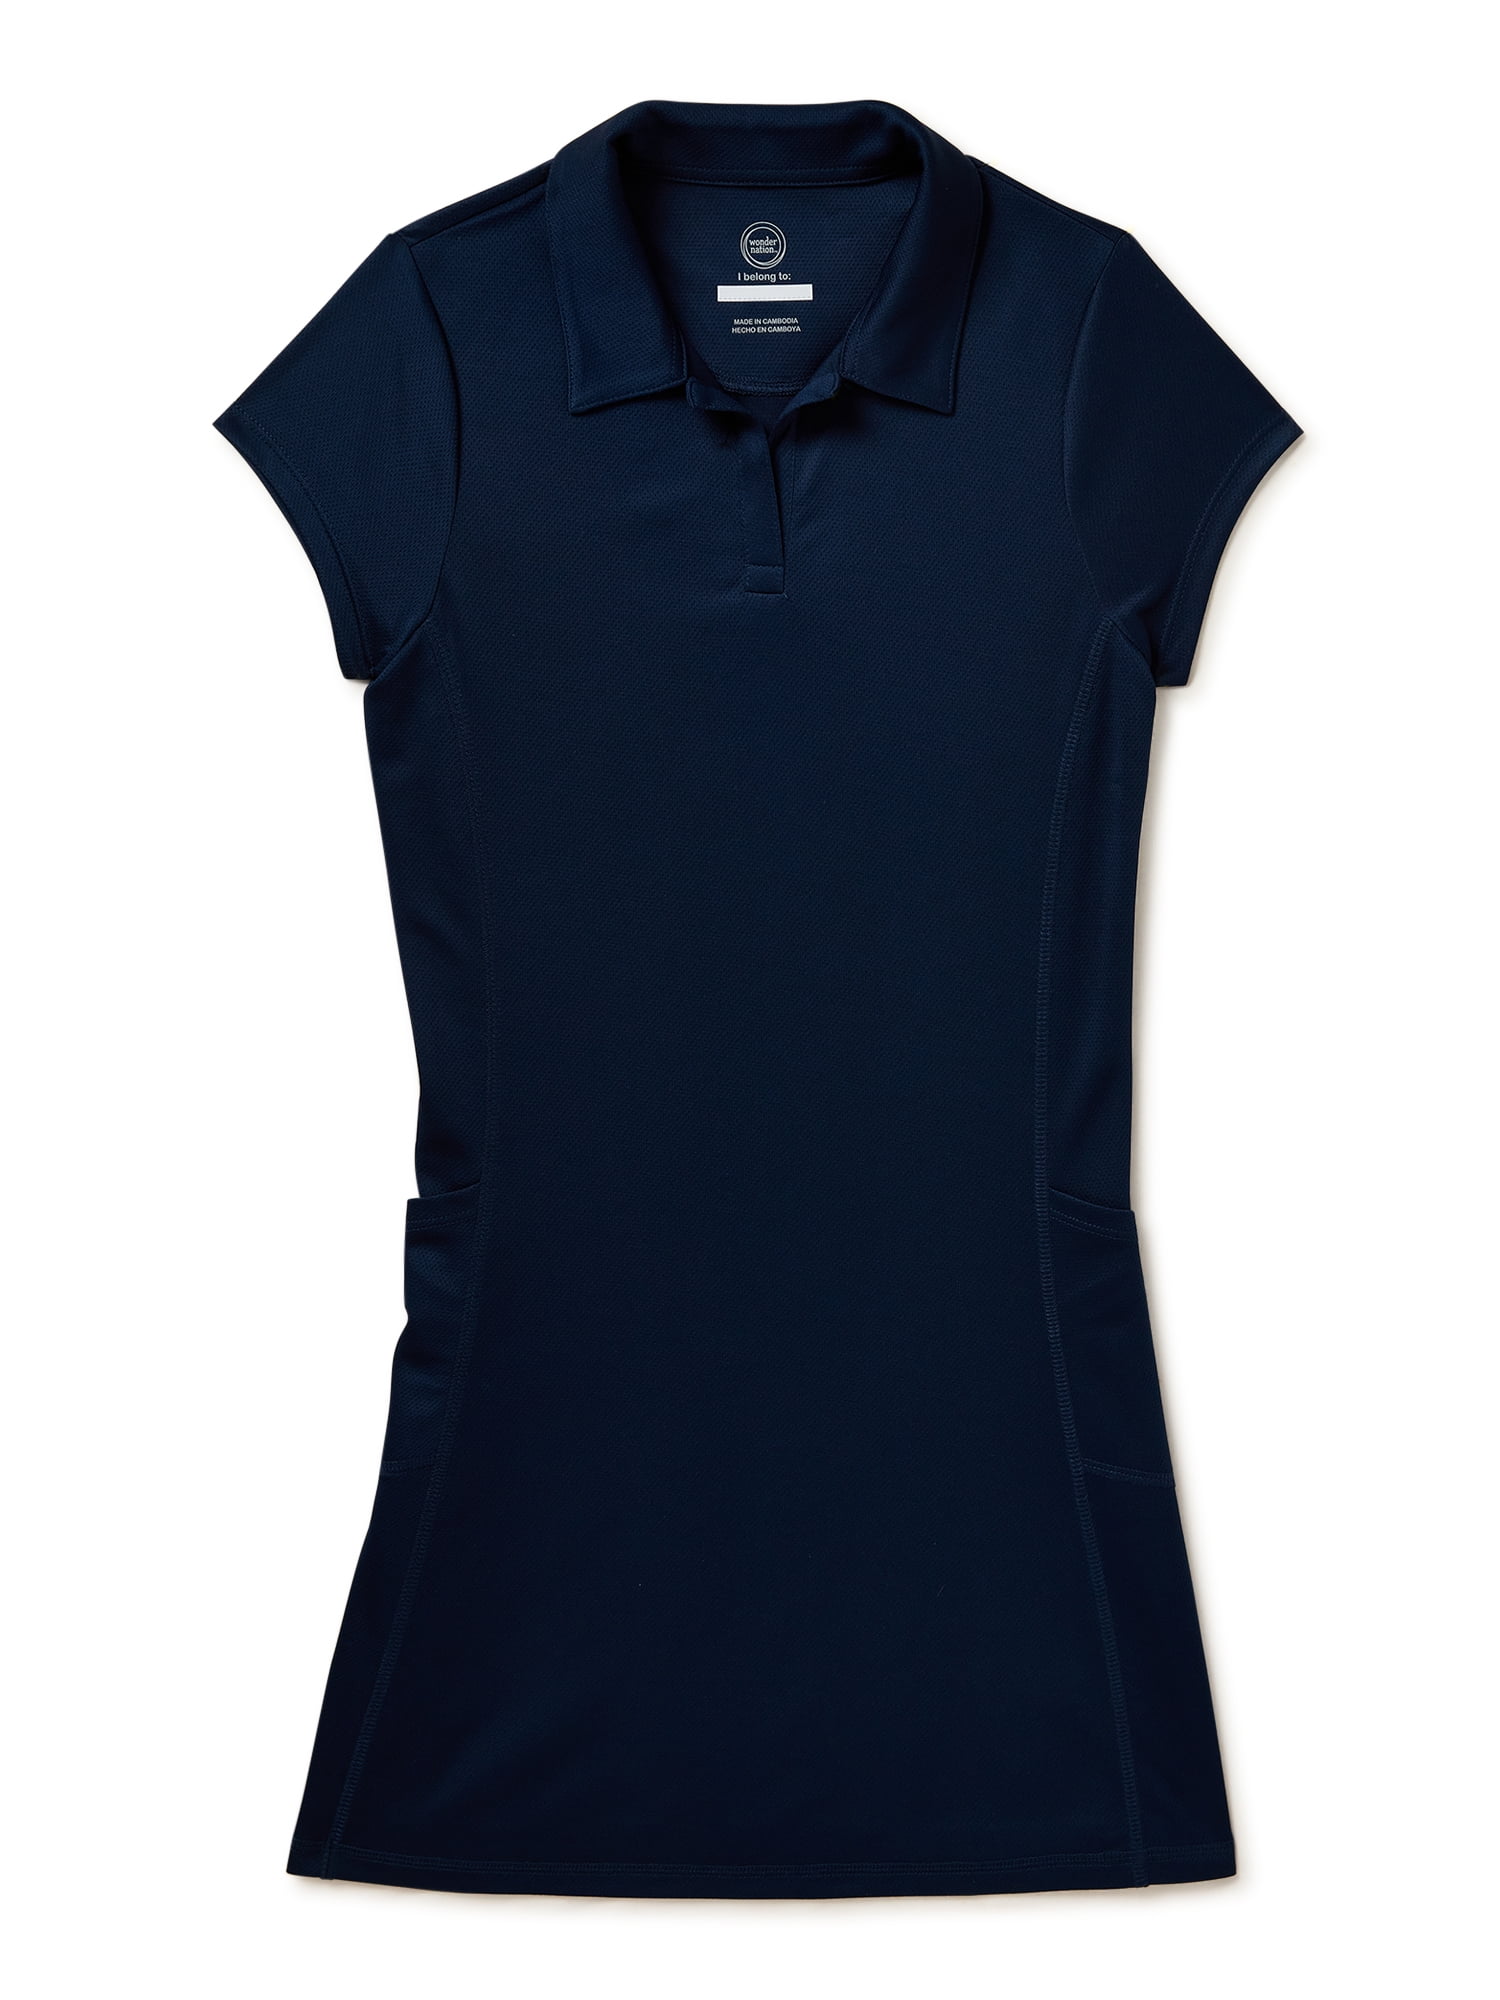  Women's Zipper Collar Sleeveless Polo Shirt Dress Golf Tennis  Workout Short Athletic Dress with Built in Shorts and Pockets Blue :  Clothing, Shoes & Jewelry